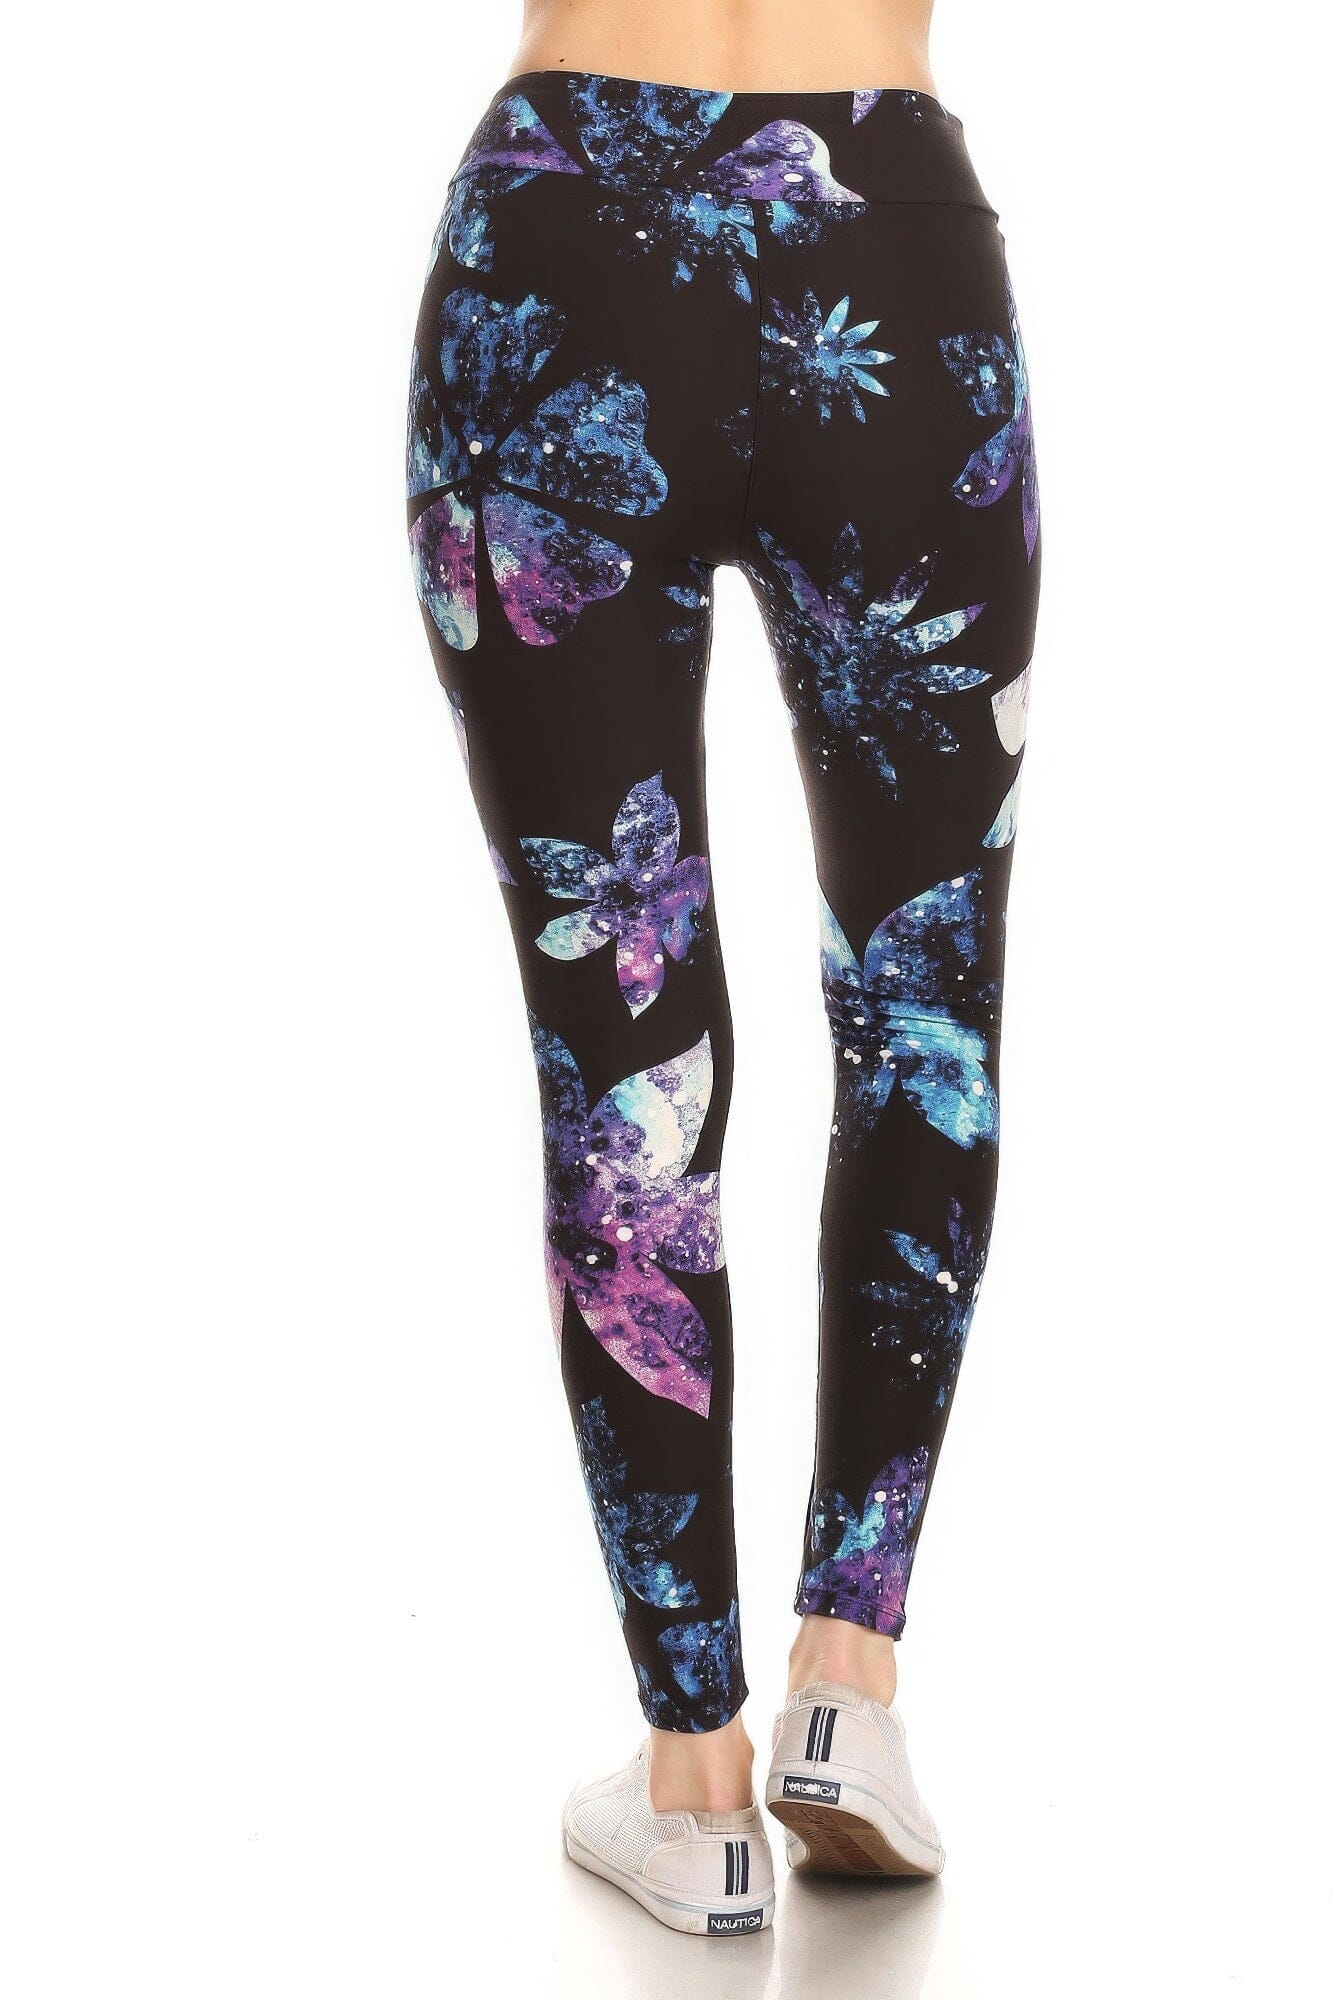 Yoga Style Banded Lined Galaxy Silhouette Floral Print In A Slim Fitting Style With A Baned High Waist Full Length Leggings Pants jehouze 